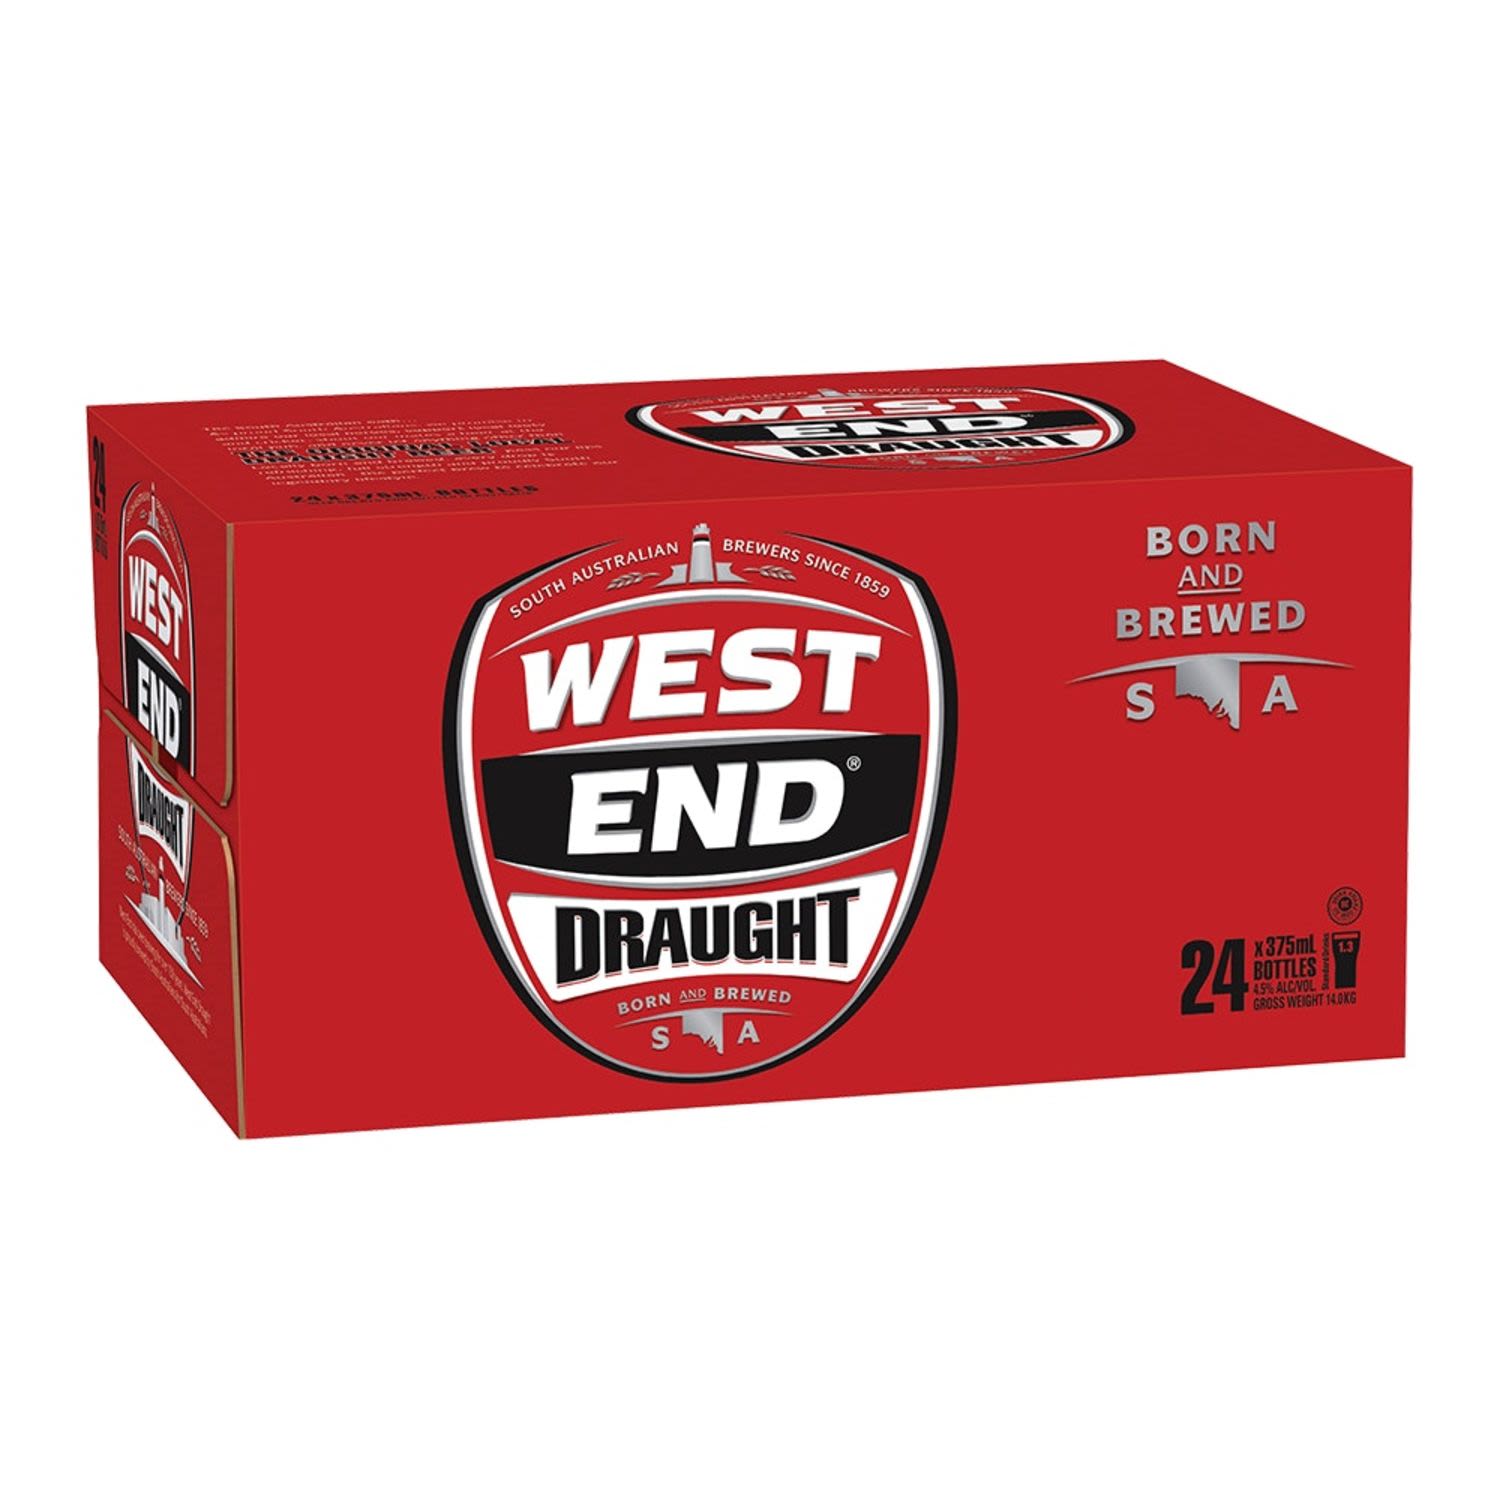 West End Draught Bottle 375mL 24 Pack